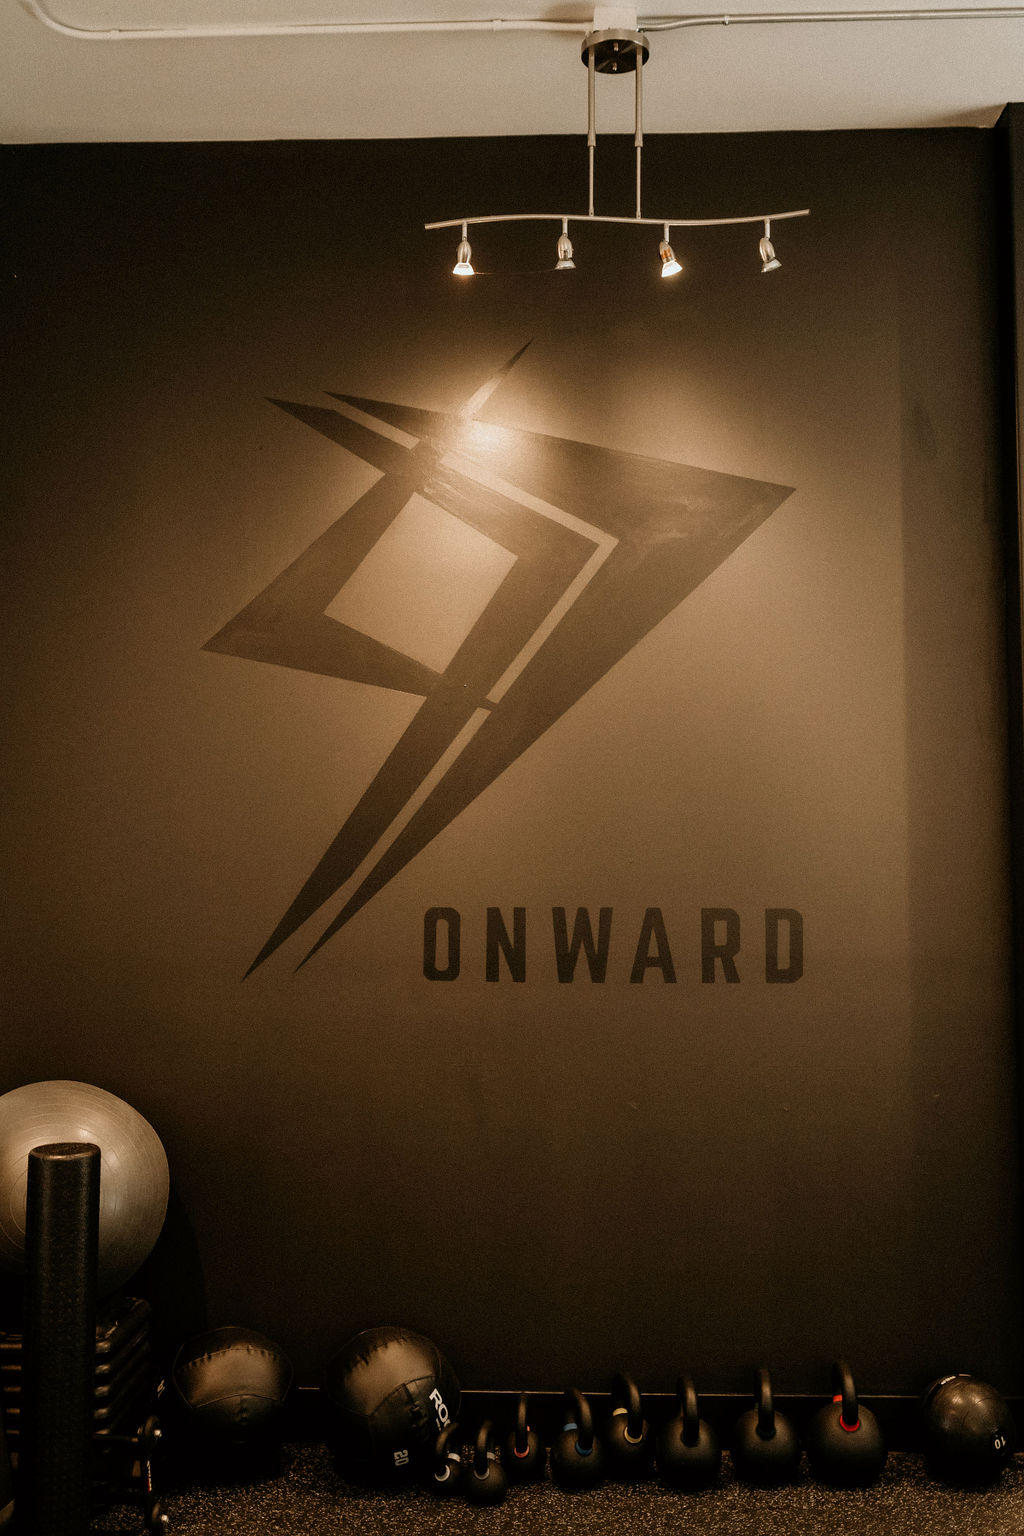 The lobby of the Onward Physical Therapy clinic, featuring a wall with a black logo.